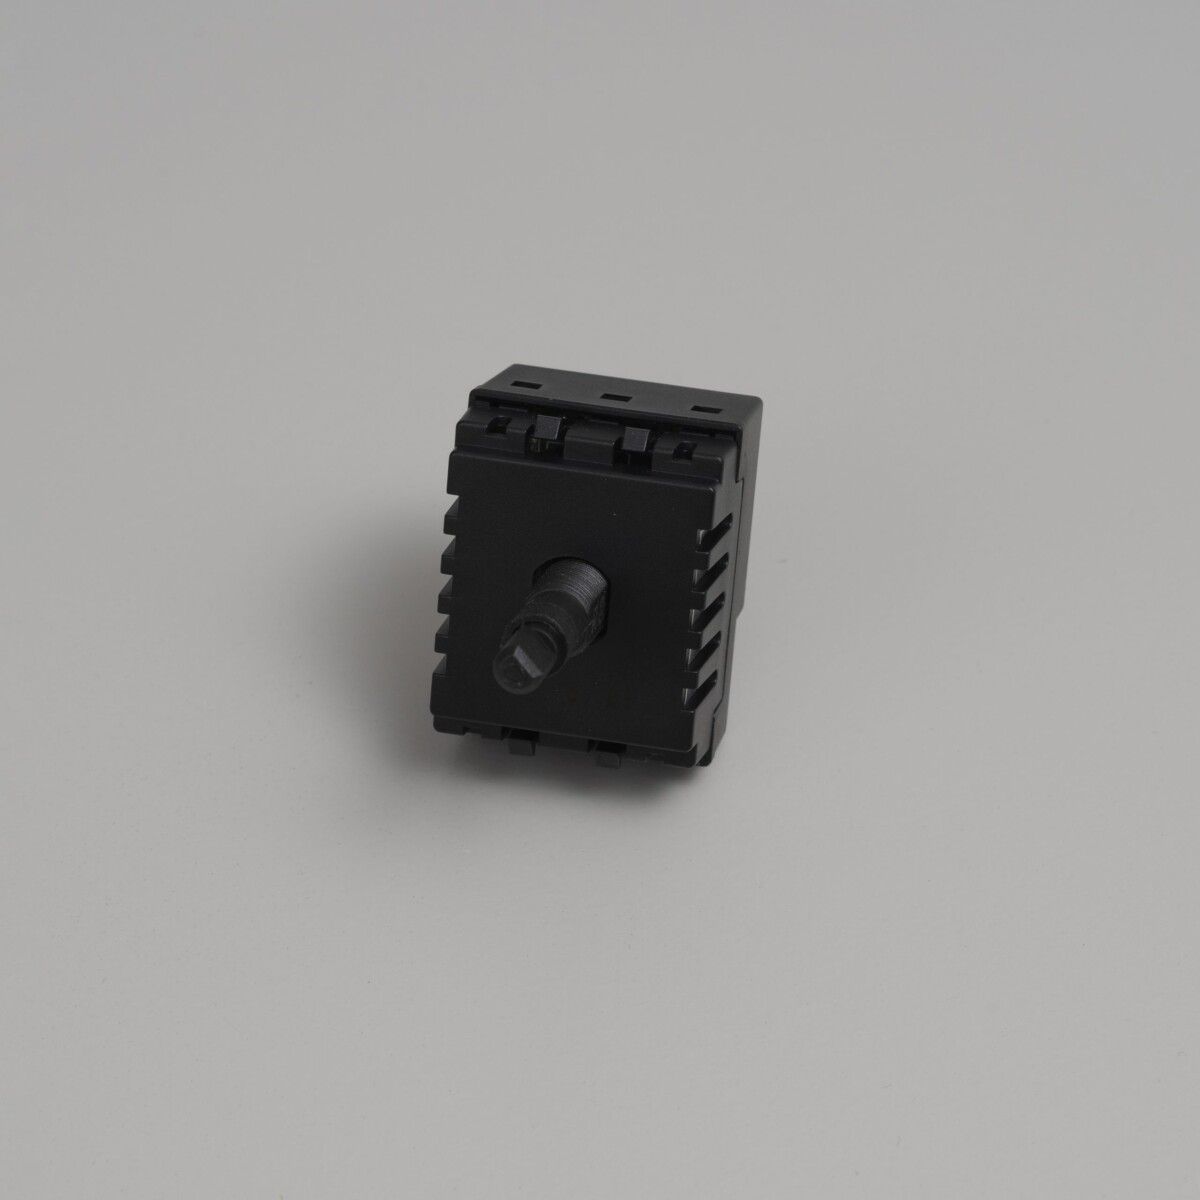 EU_Electricty_Dimmer_Module_100W_front_Web-1-scaled